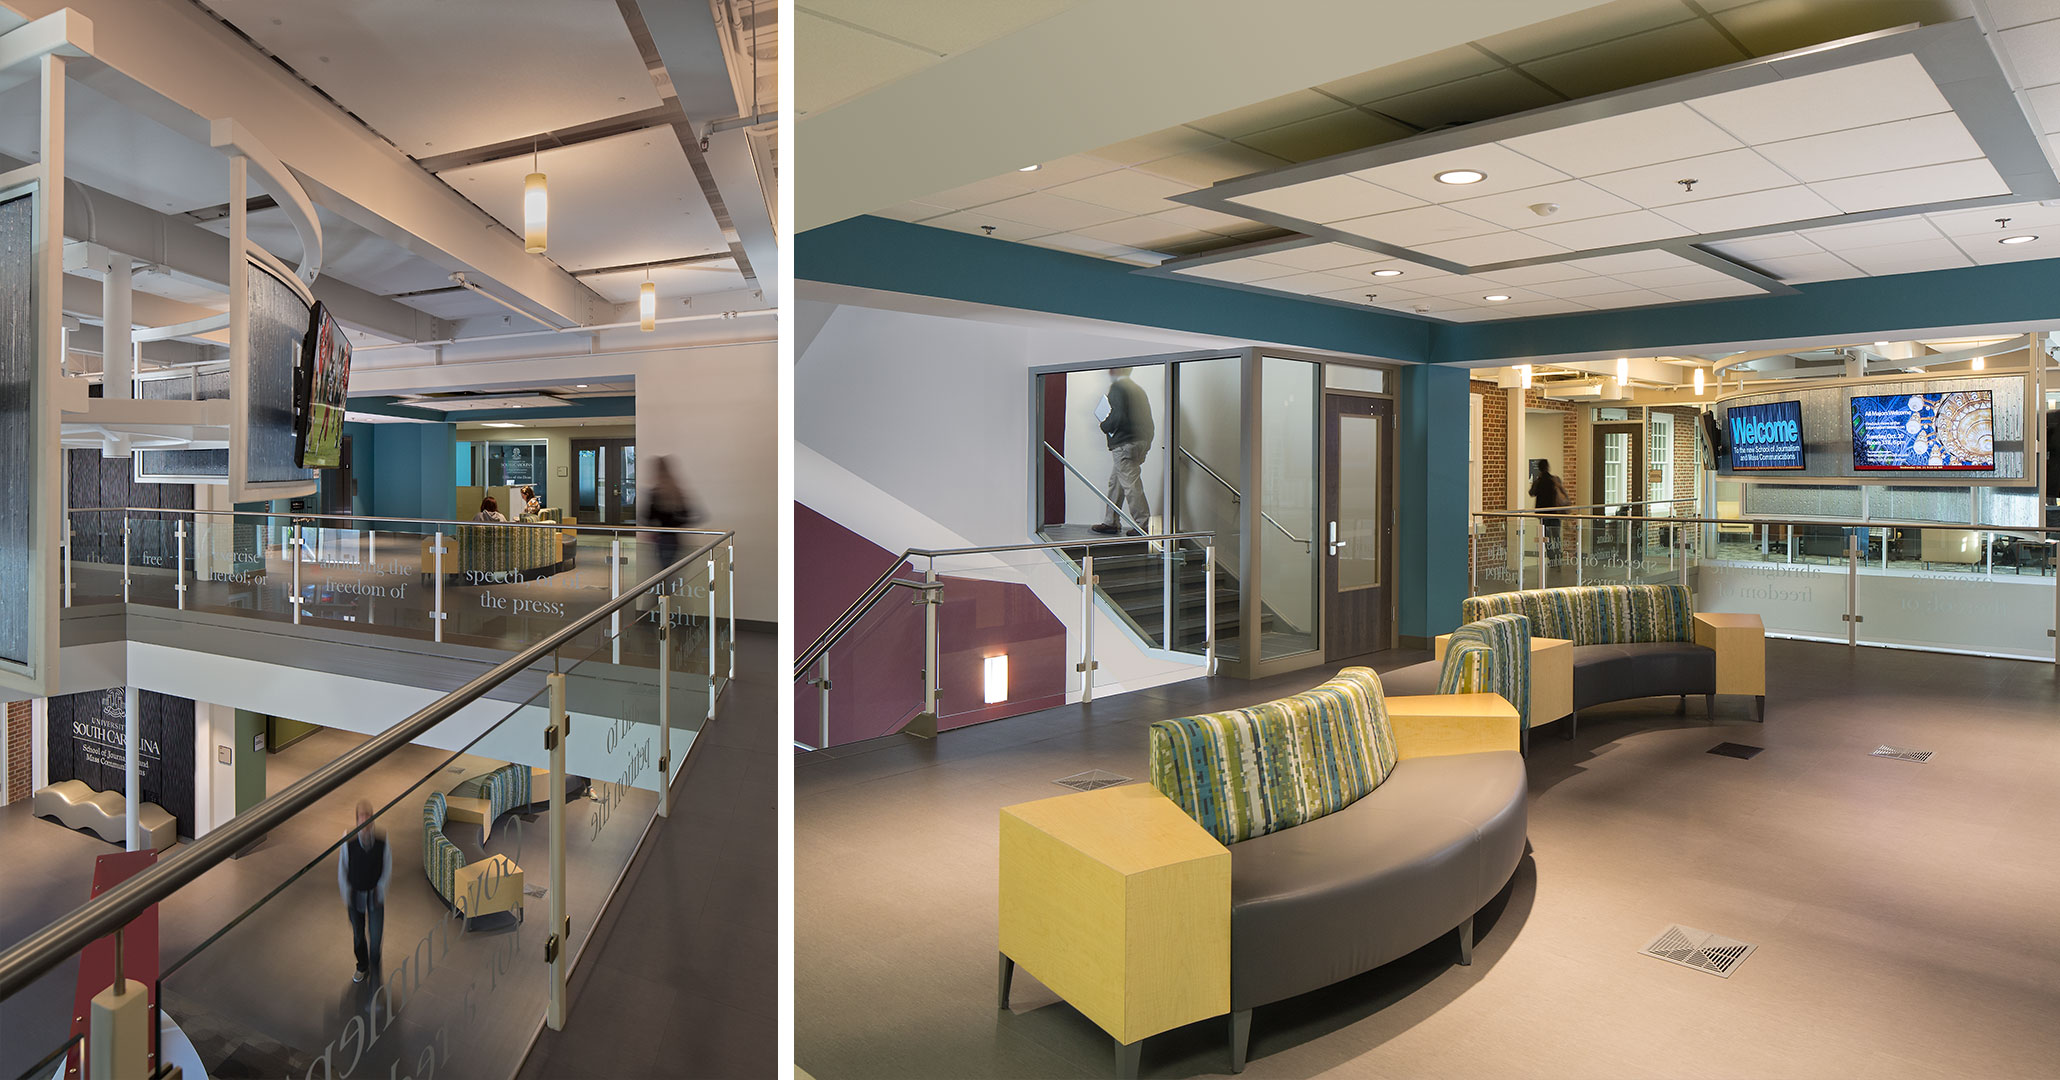 University of South Carolina worked with Boudreaux architects to improve the interior spaces for students at the School of Journalism.